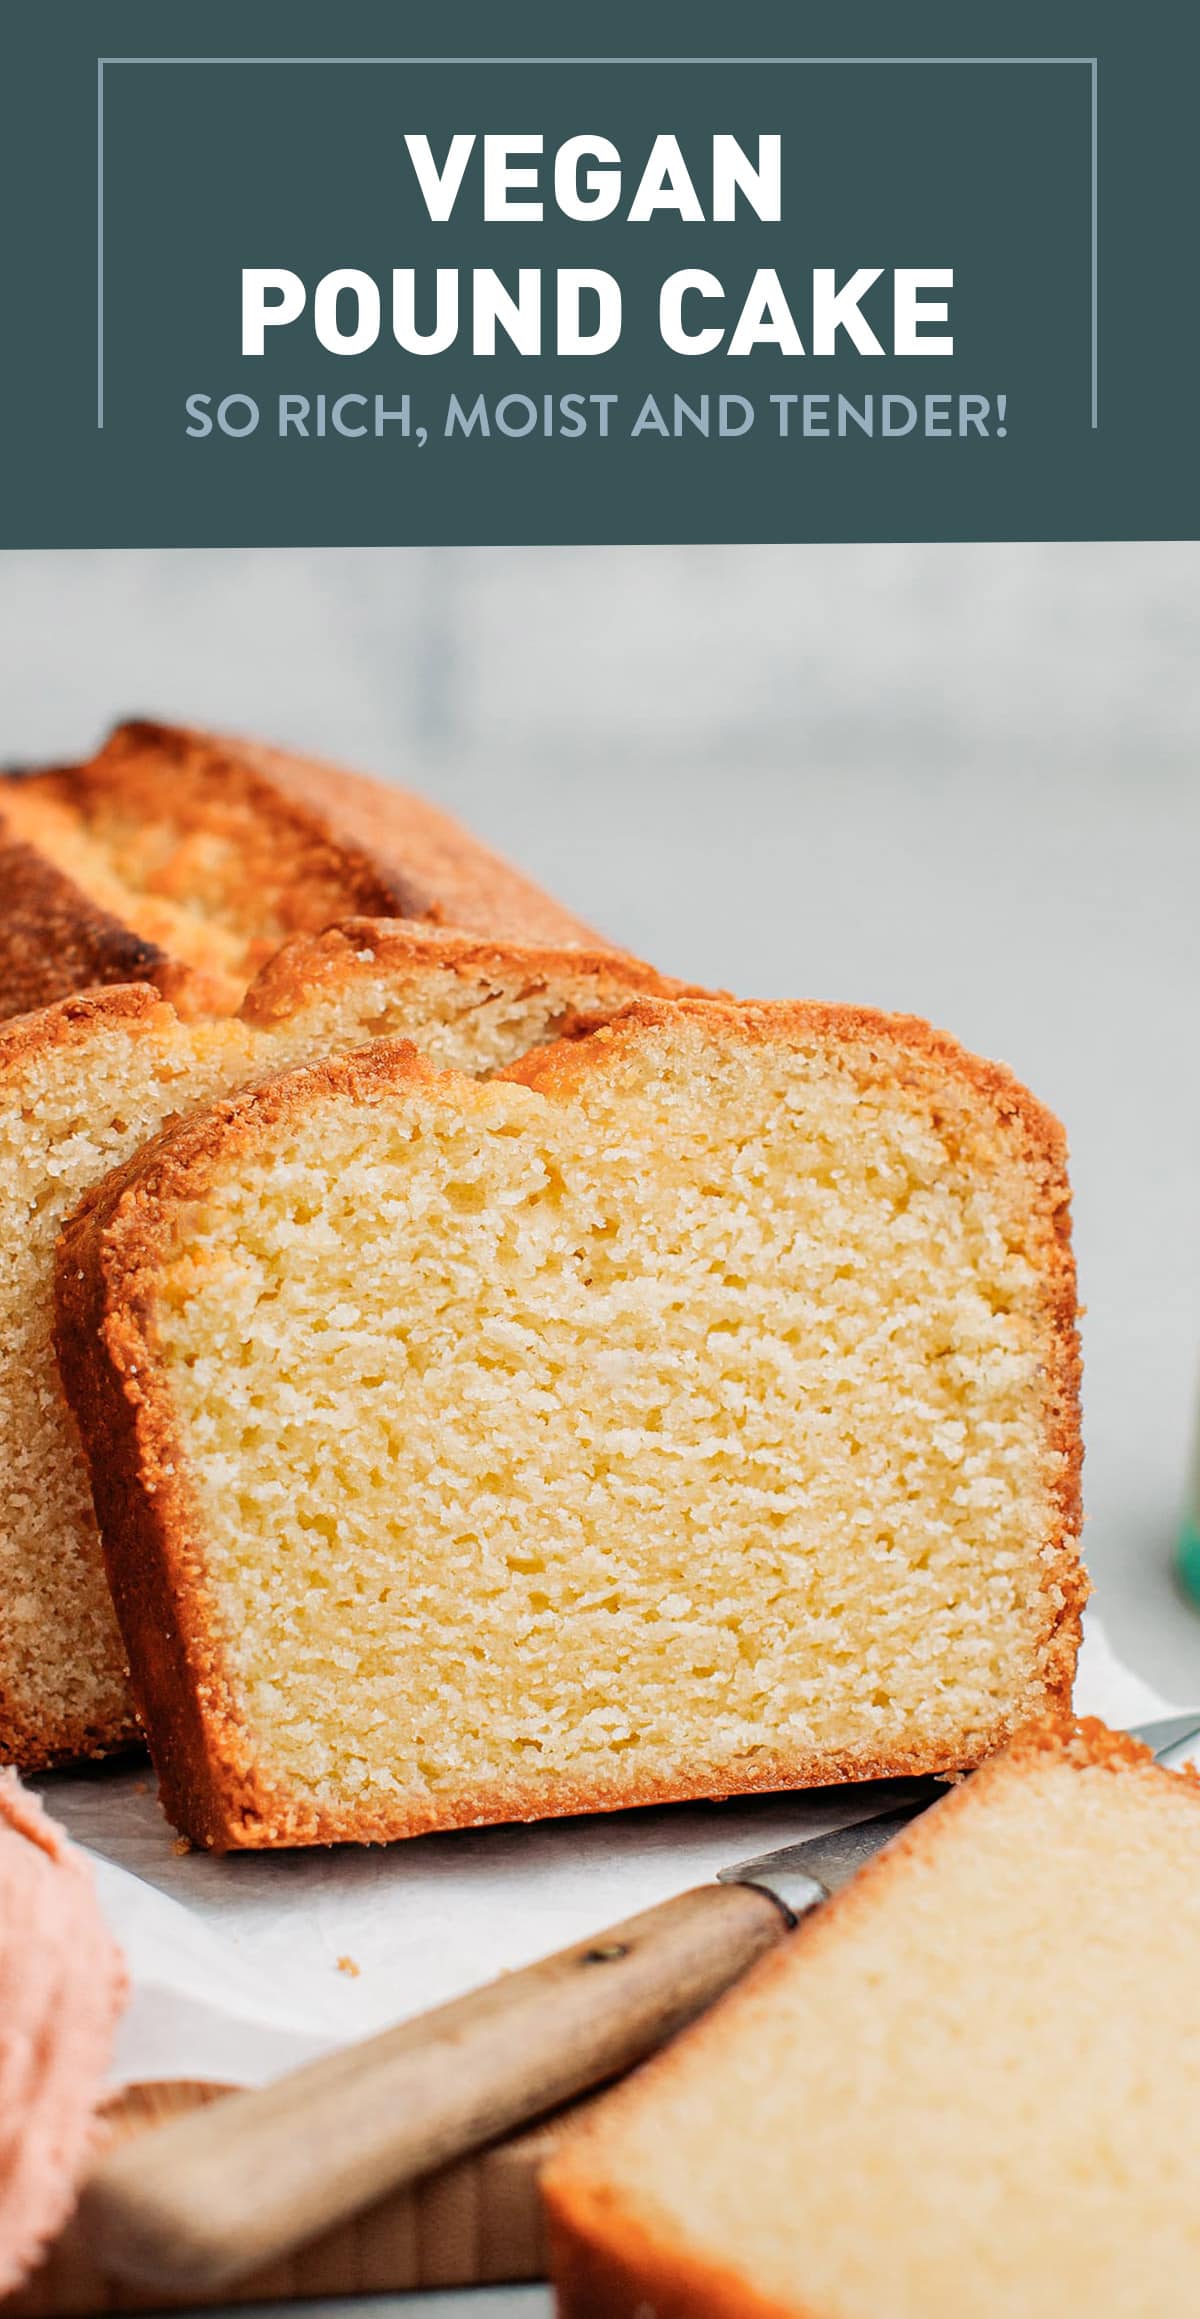 Introducing the best vegan pound cake! It is so rich and tender that you will never believe this pound cake is entirely eggless and plant-based. Complemented by a hint of vanilla, this classic dessert has a dense yet delicate crumb that will leave you asking for an extra slice! #vegan #baking #poundcake